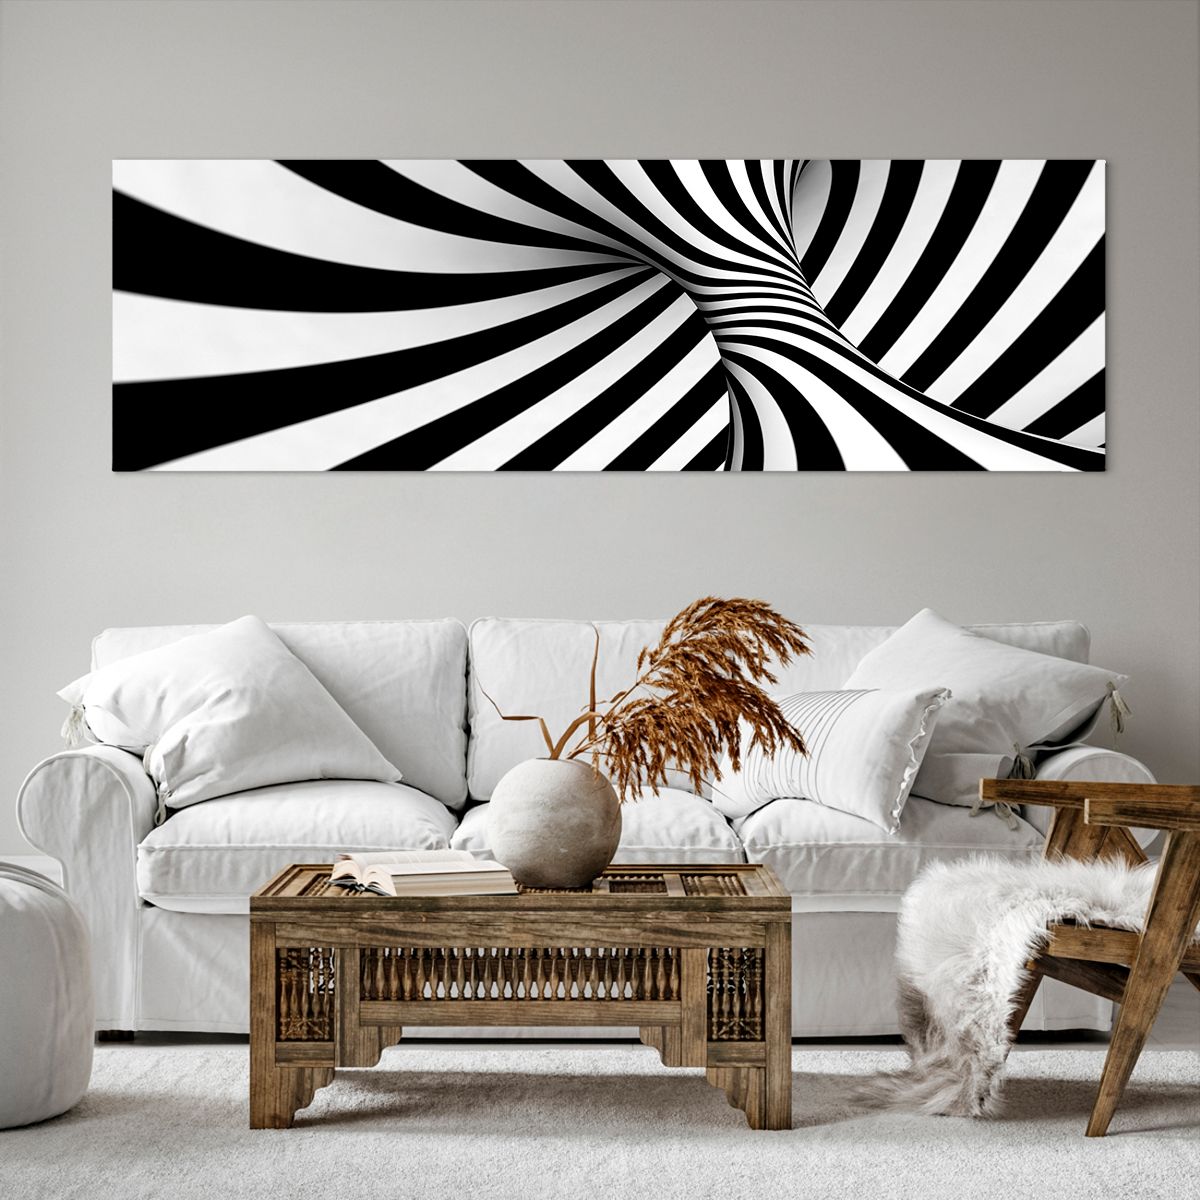 Impression sur toile Abstraction, Impression sur toile 3D, Impression sur toile Noir Et Blanc, Impression sur toile Vortex, Impression sur toile Spirale